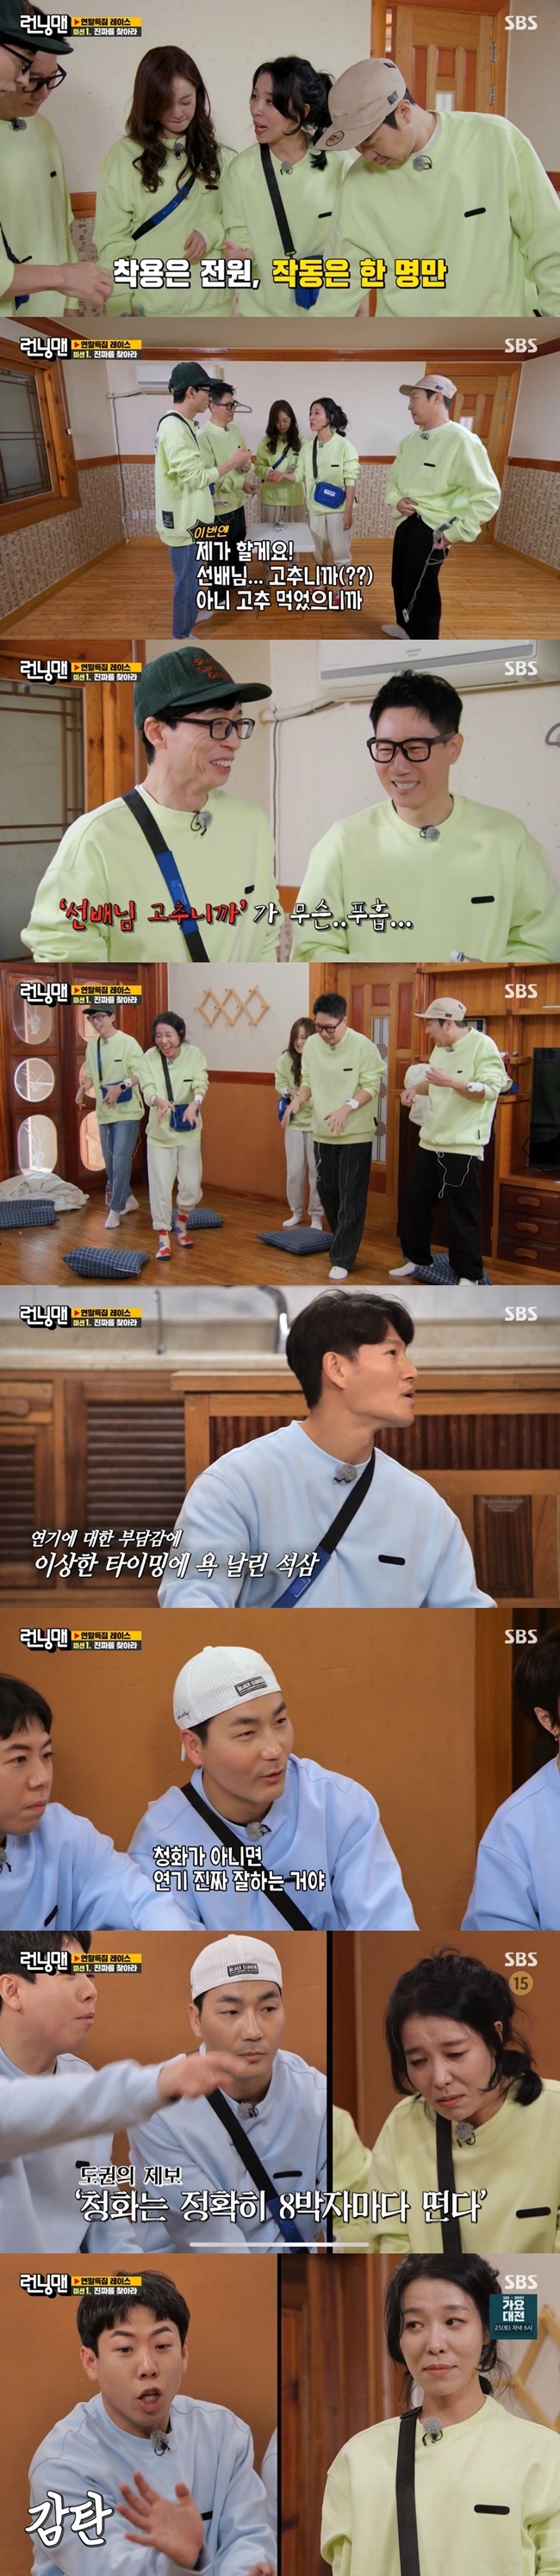 Actor Cha Chung-hwa made a giddy speech mistake to Yoo Jae-Suk, causing a rascal.On SBS Running Man broadcasted on December 19, it was decorated with a year-end special race and Hadokwon, Cha Chung Hwa and Heo Young-ji appeared as guests.In the first mission, Find the Real, you had to identify the person who ate the pepper and the person who played.Kim Jong-kook speculated that Cha Chung-hwa would have eaten Cheongyang red pepper, and Song Ji-hyo alone suspected Yoo Jae-Suk.The confirmation revealed that the person who ate the real pepper was Yoo Jae-Suk.The third round is to find someone who actually used a low-frequency massager, who told Yoo Jae-Suk, Ill do it, boss, because I ate peppers.In the coincident speech of Cha Chung Hwa, Jeon So-min said, I was surprised, sister, Yoo Jae-Suk said, What is your seniors red pepper?The game started in earnest. Cha Chung-hwa was suffering from low frequency, and Kim Jong-kook took the attention of the team.Then suddenly Yang Se-chan suspected Jeon So-min, saying it was not a tea ceremony.When the opponent asked him to sit down, Ji Suk-jin suddenly said, I can not sit down and I am XX. Yoo Jae-Suk laughed at the embarrassment, saying, Why do you swear?Heo Young-ji, Song Ji-hyo, Ha Do-kwon, and Yang Se-chan said it was like Cha Chung-hwa, and Kim Jong-kookman suspected Yoo Jae-Suk.Eventually, the team pointed to Cha Chung-hwa, but the low-frequency drinking protagonist was Yoo Jae-Suk; unexpectedly, Yang Se-chan told the sub-contracting, Why are you so good at it?Can you make sense to break like this?